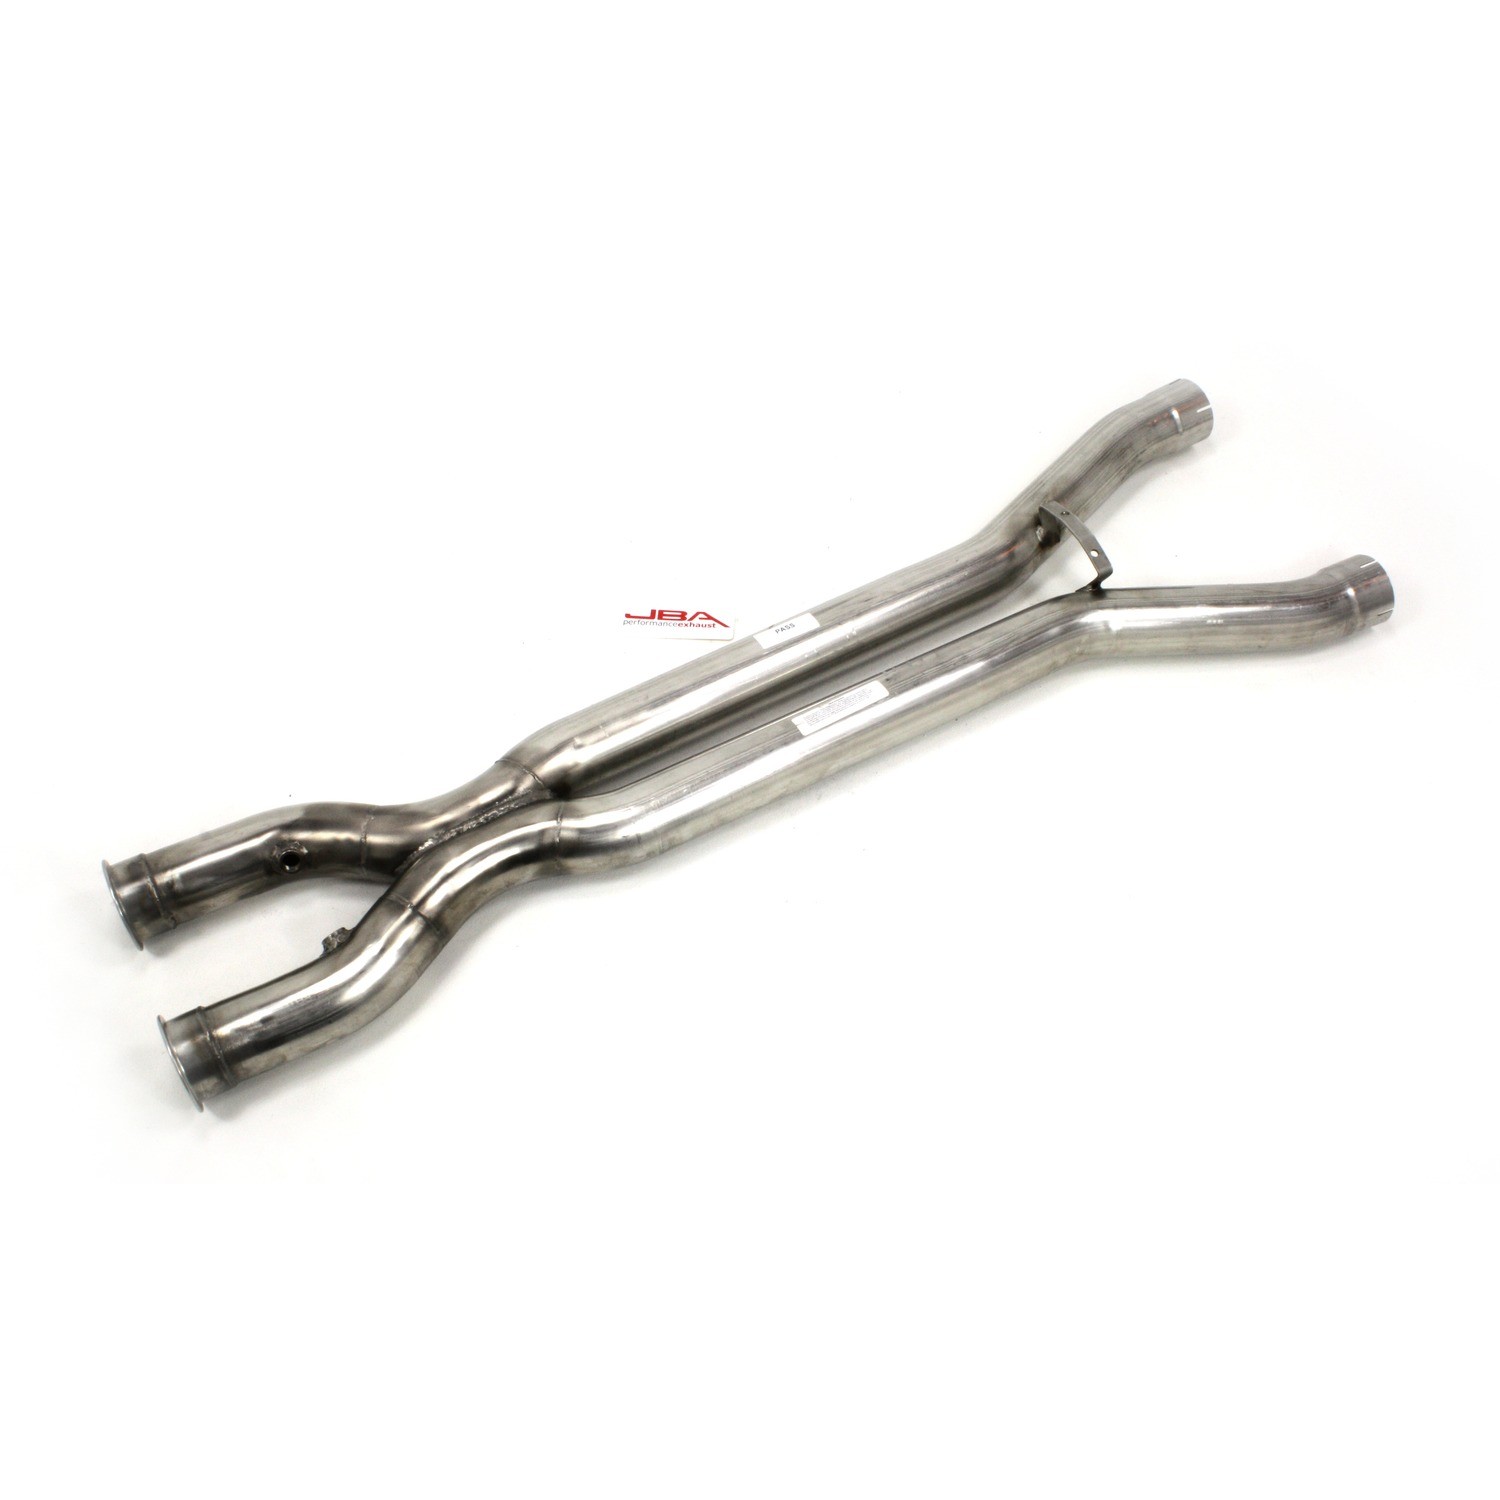 C7 Corvette 6.2L LT1/4 304 Stainless Steel X-Pipe without Cats, JBA